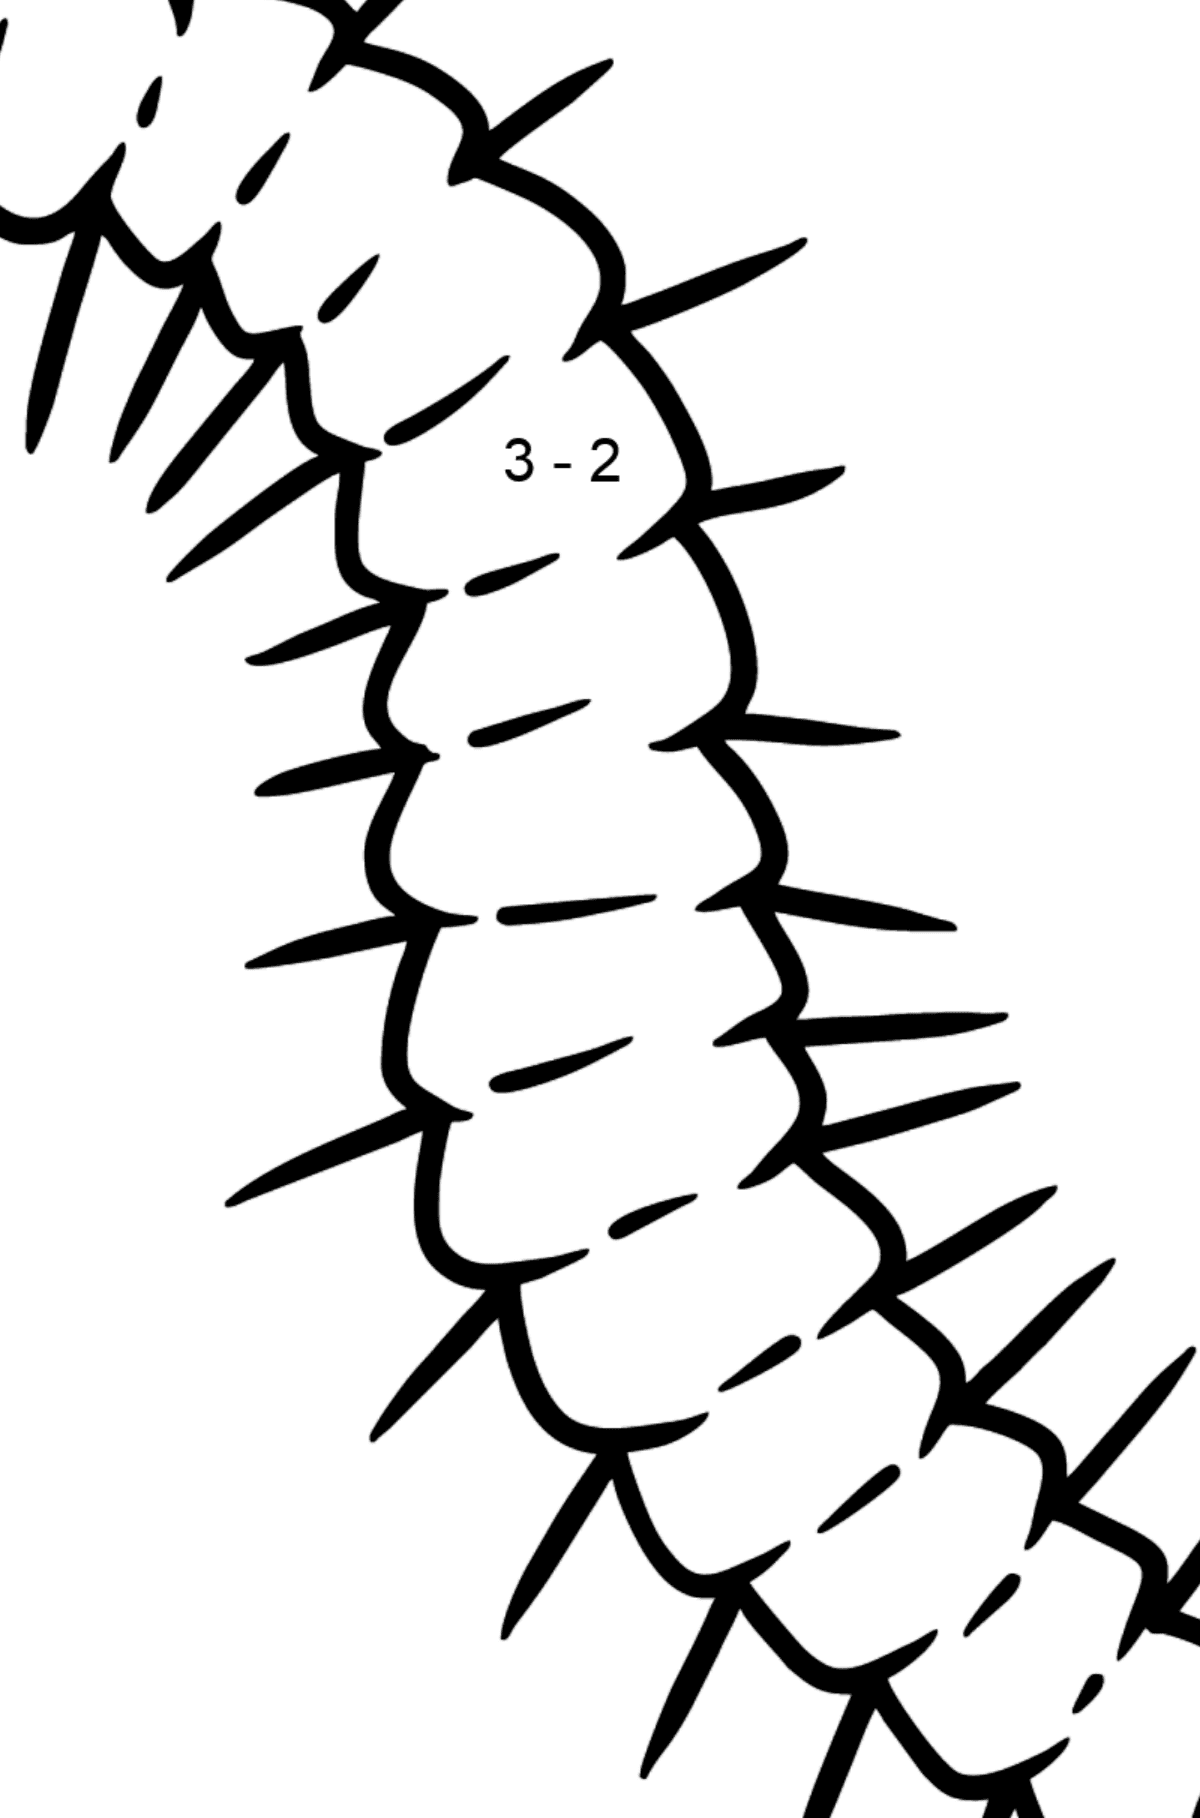 Centipede coloring page - Math Coloring - Subtraction for Kids